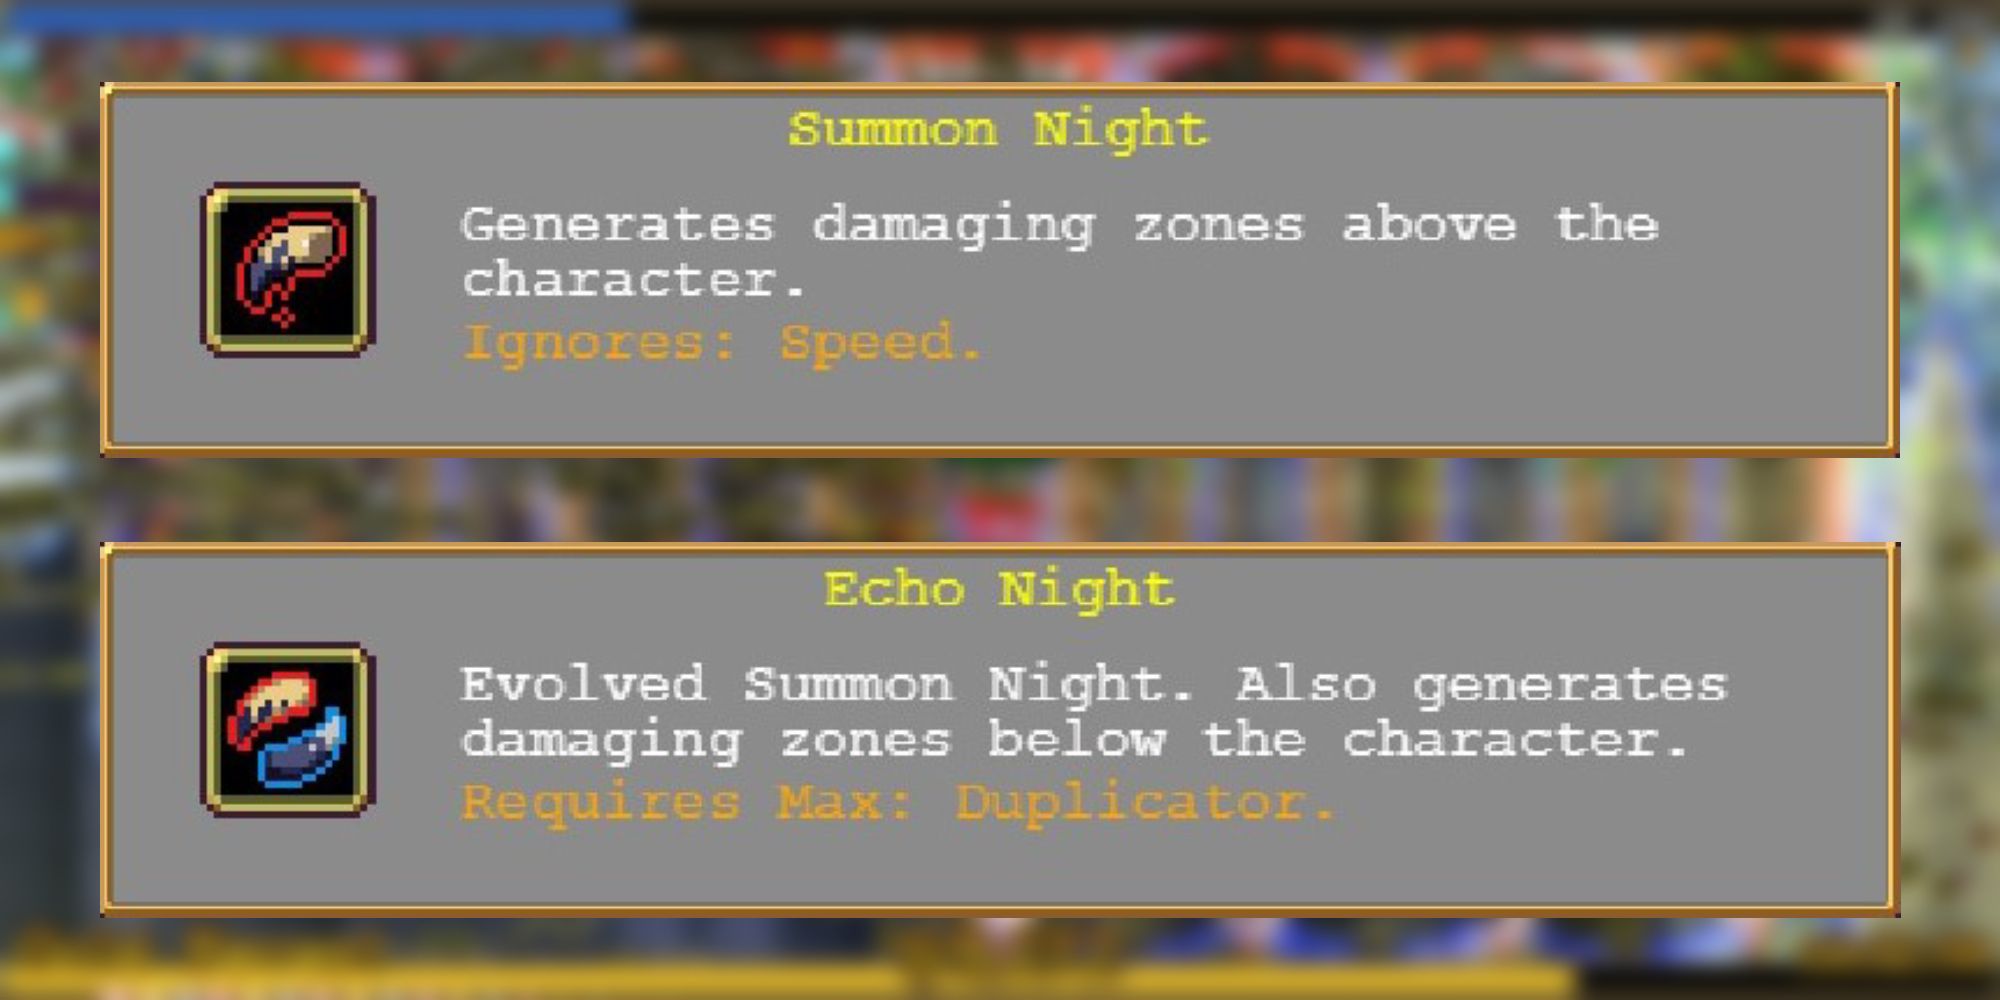 Information on the weapons Summon Night and Echo Night from Vampire Survivors.